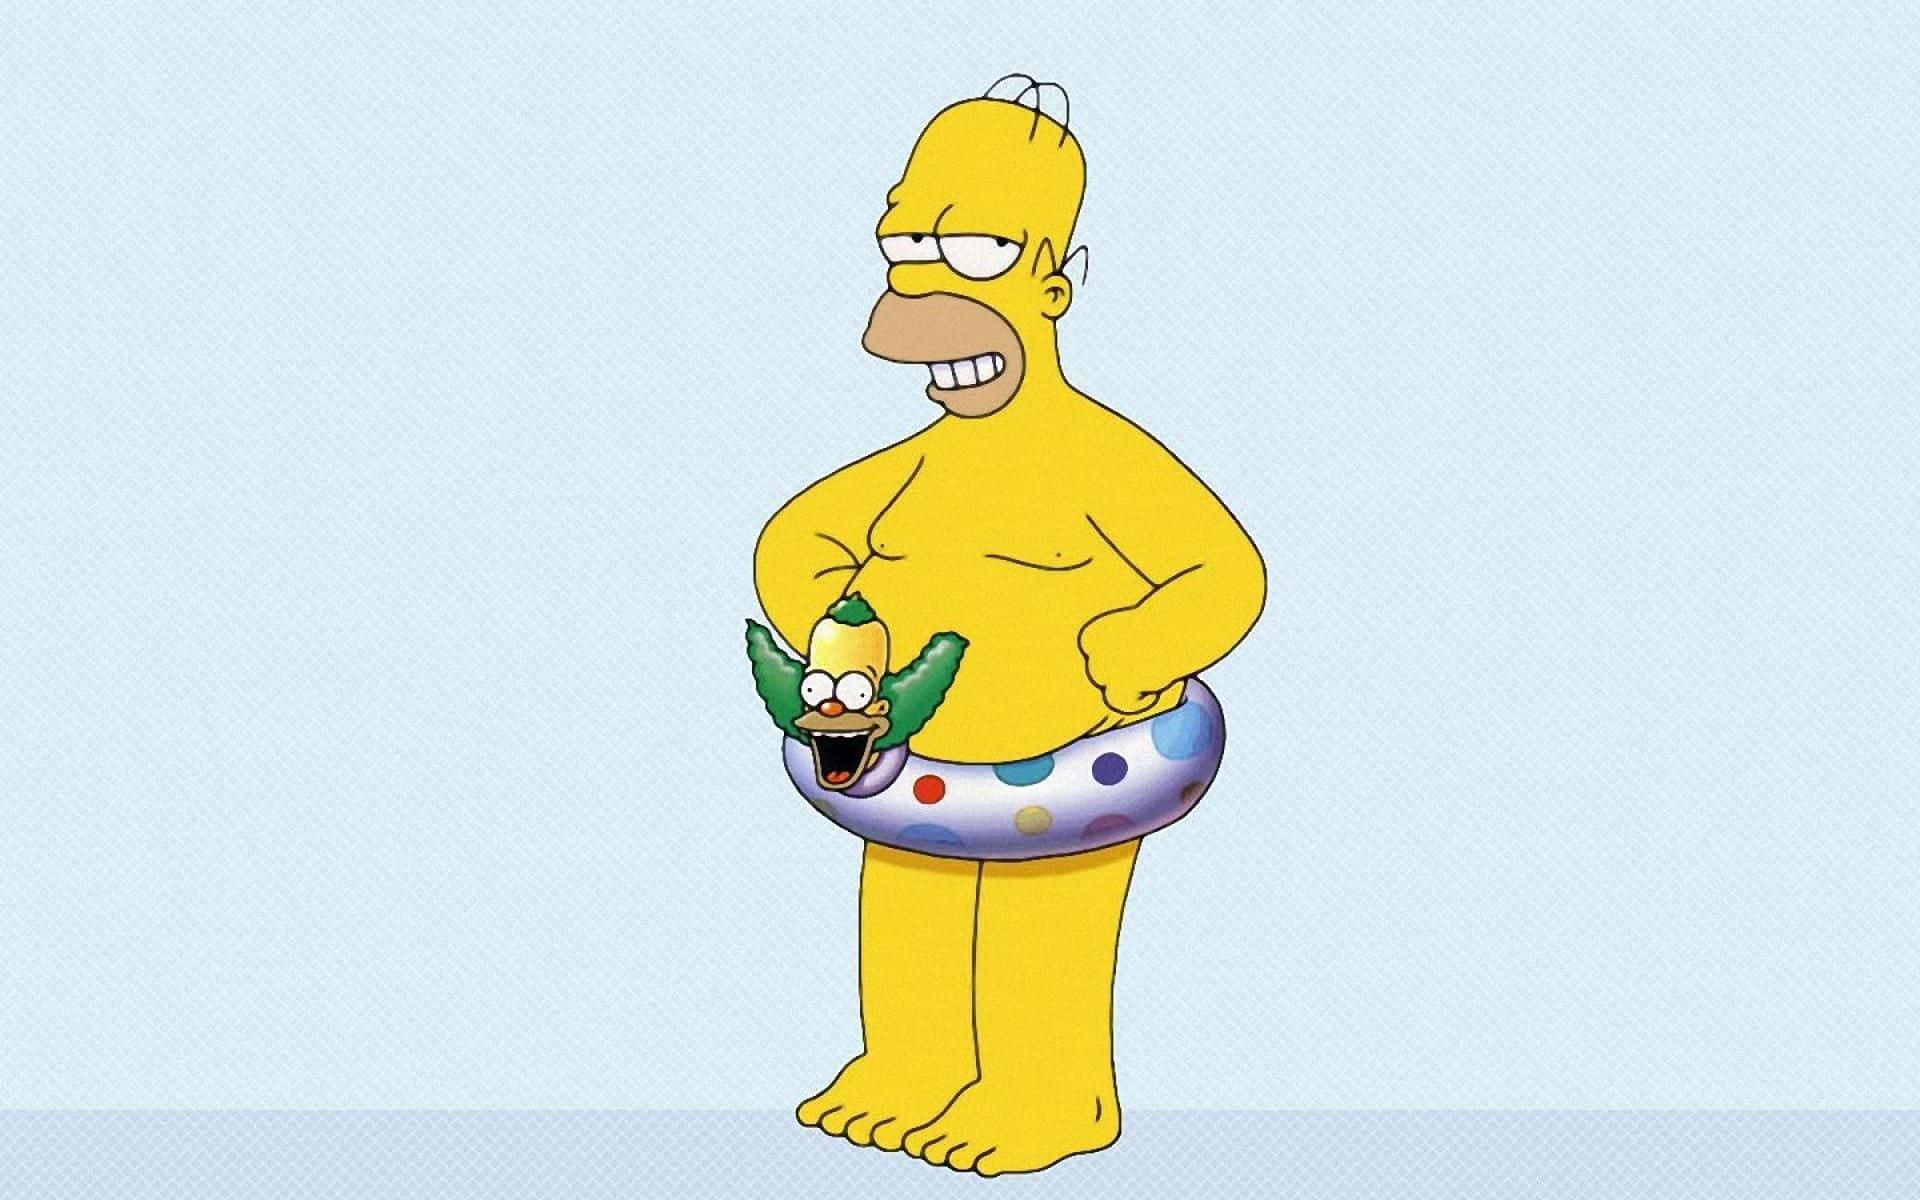 "The Simpsons Always Know How to Make You Laugh" Wallpaper